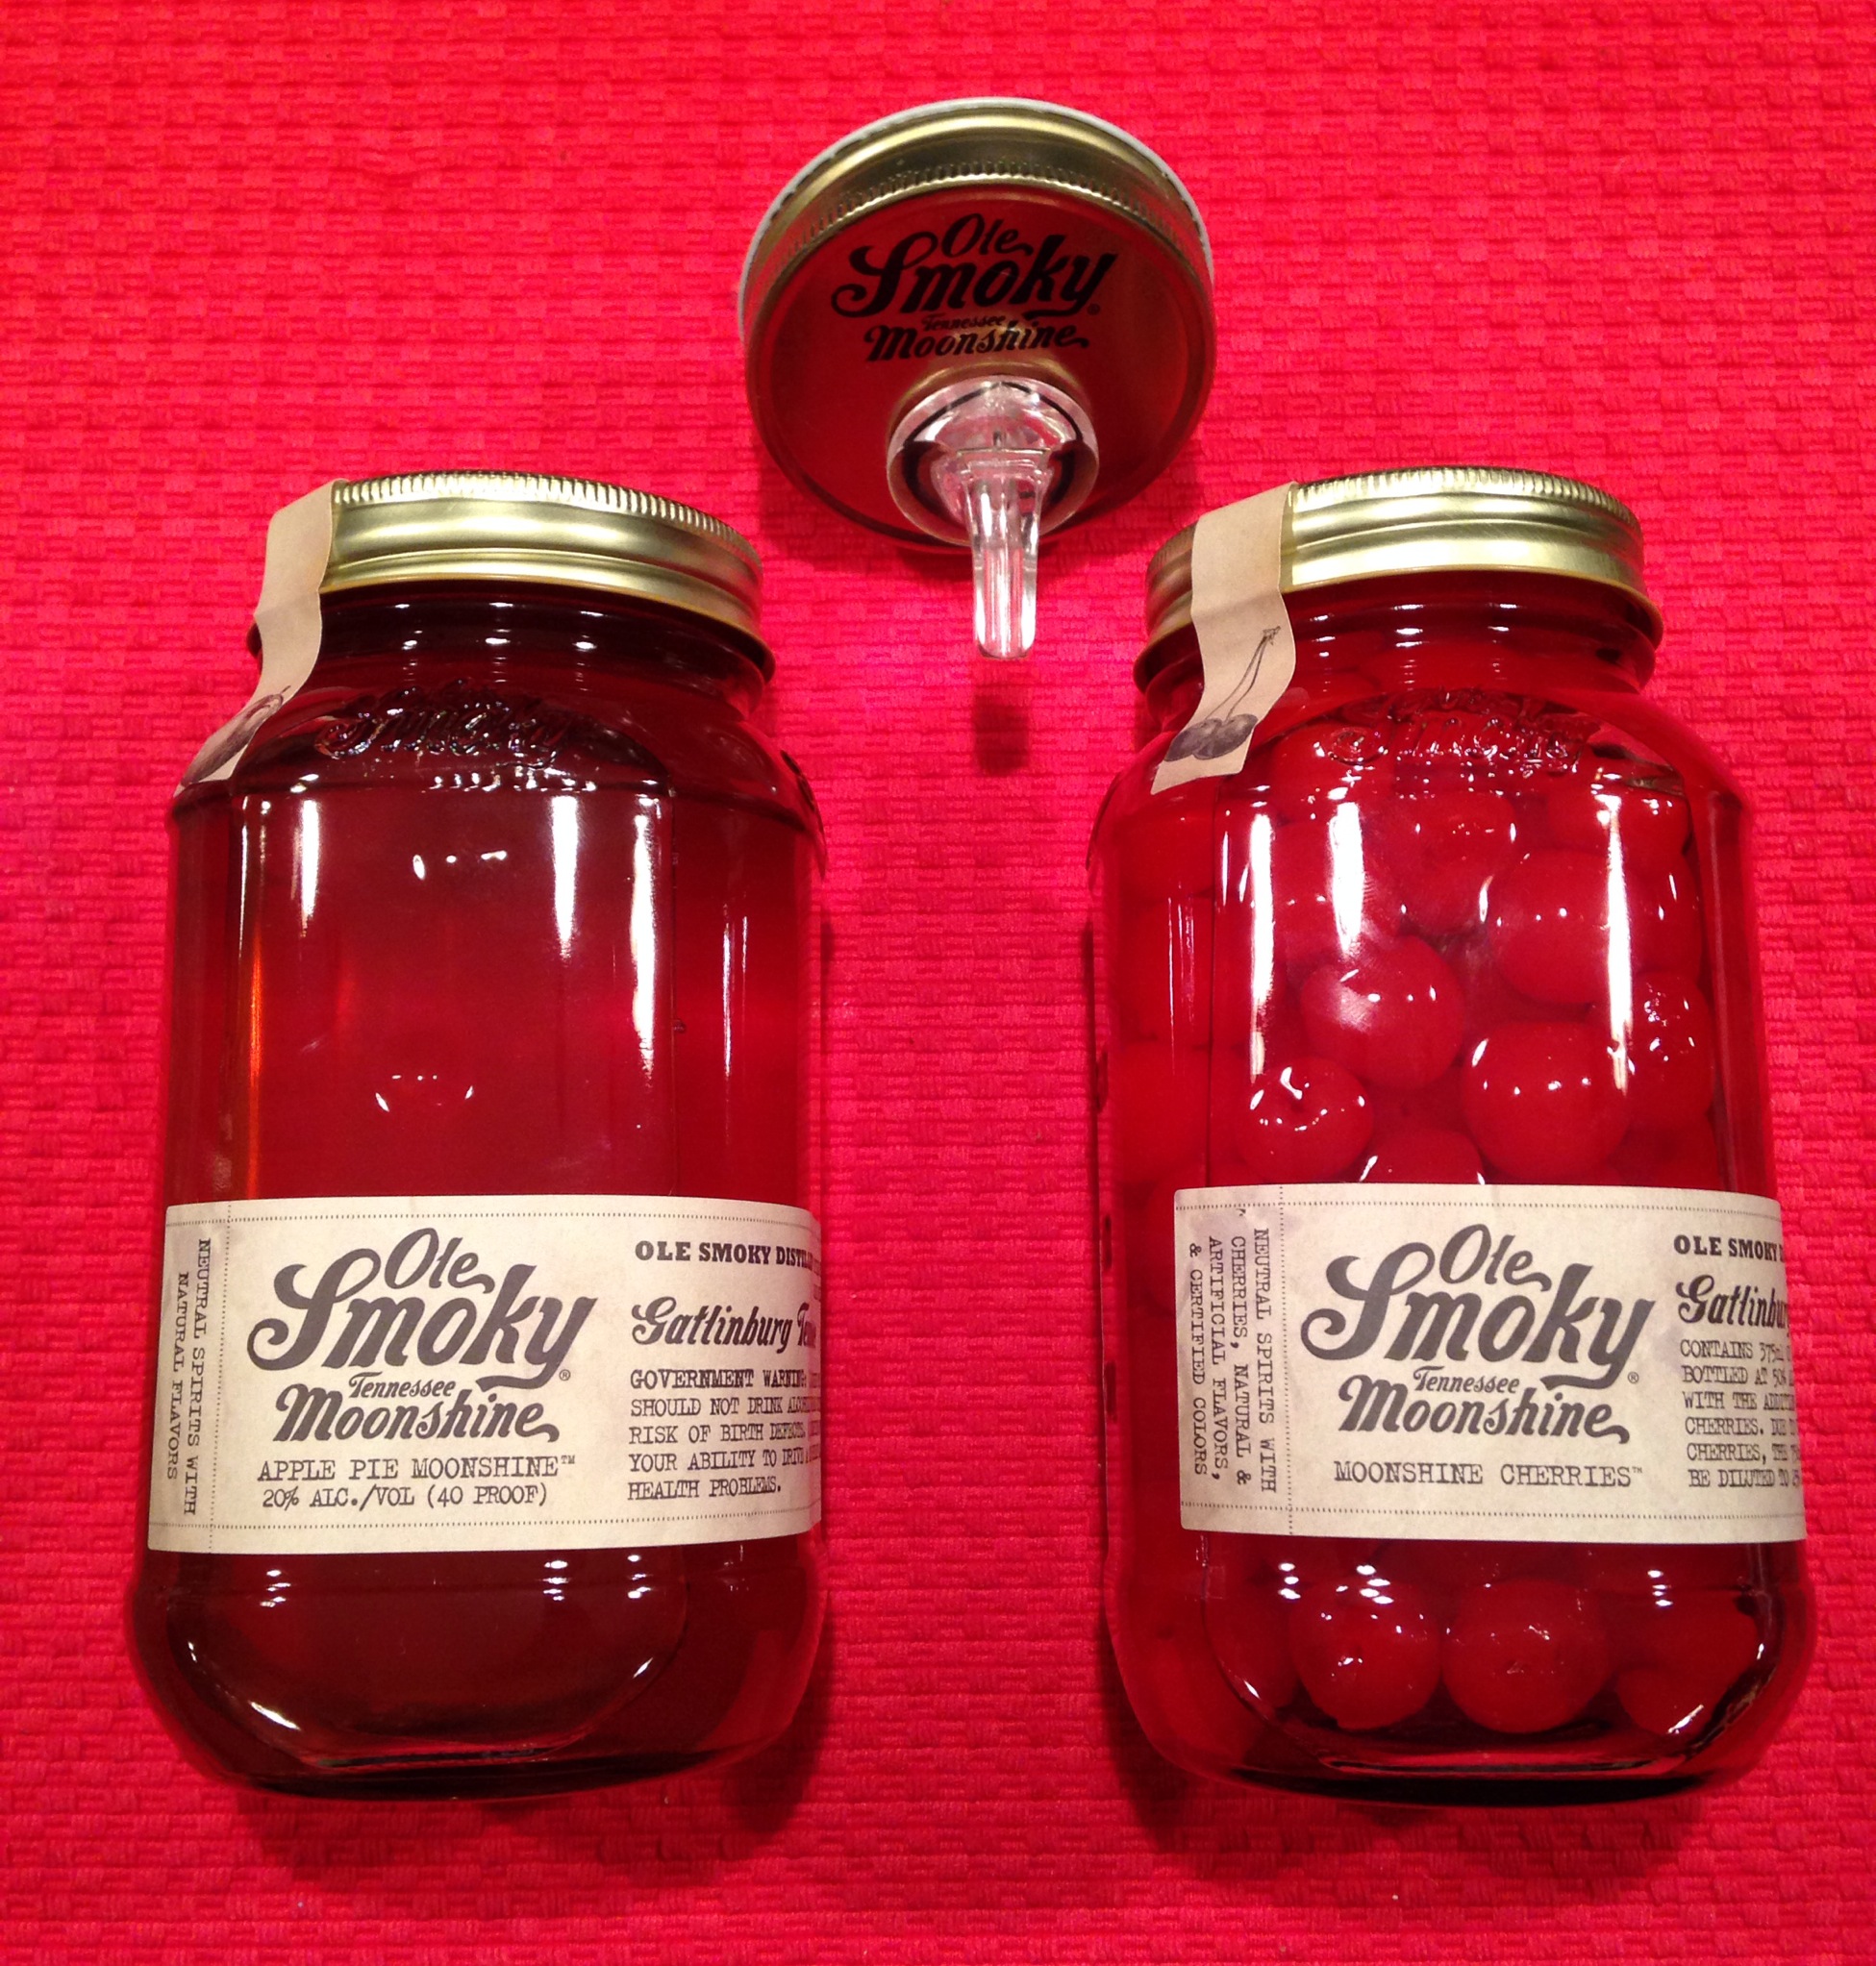 Here's our purchases from Ole Smoky Moonshine.